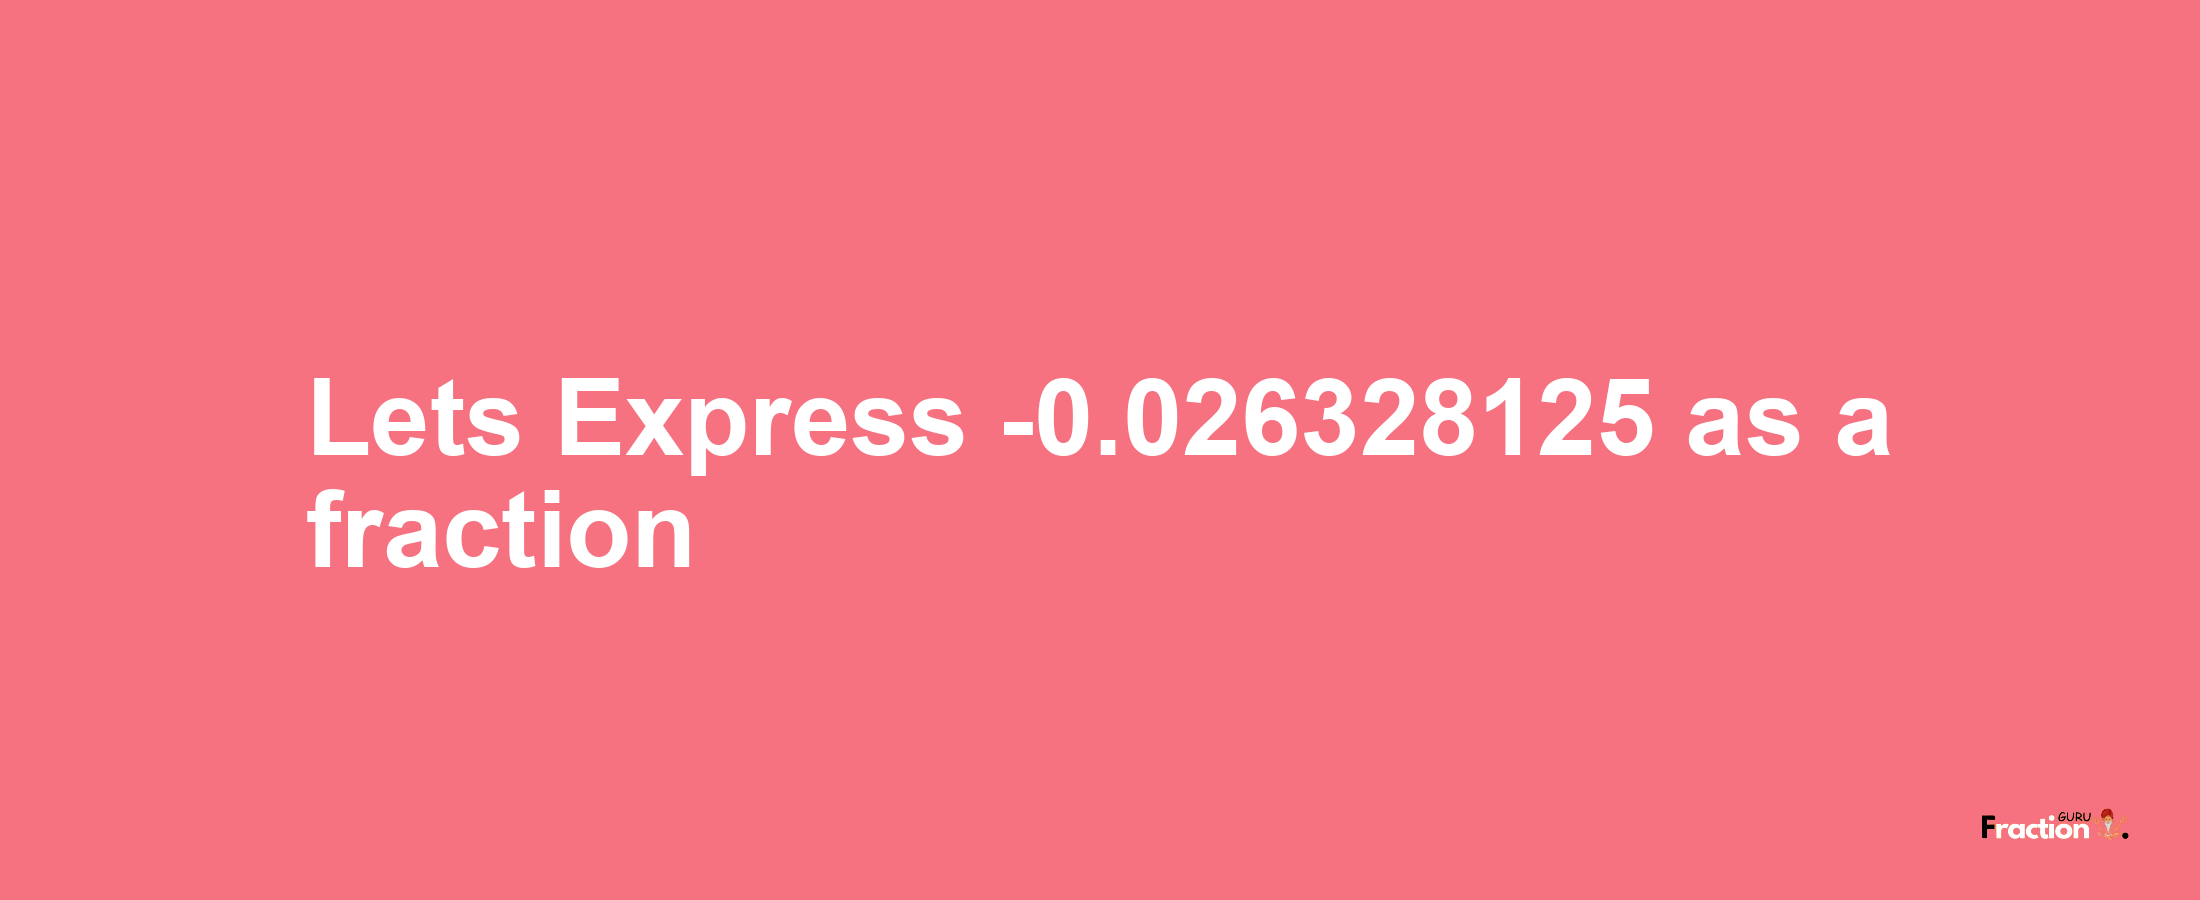 Lets Express -0.026328125 as afraction